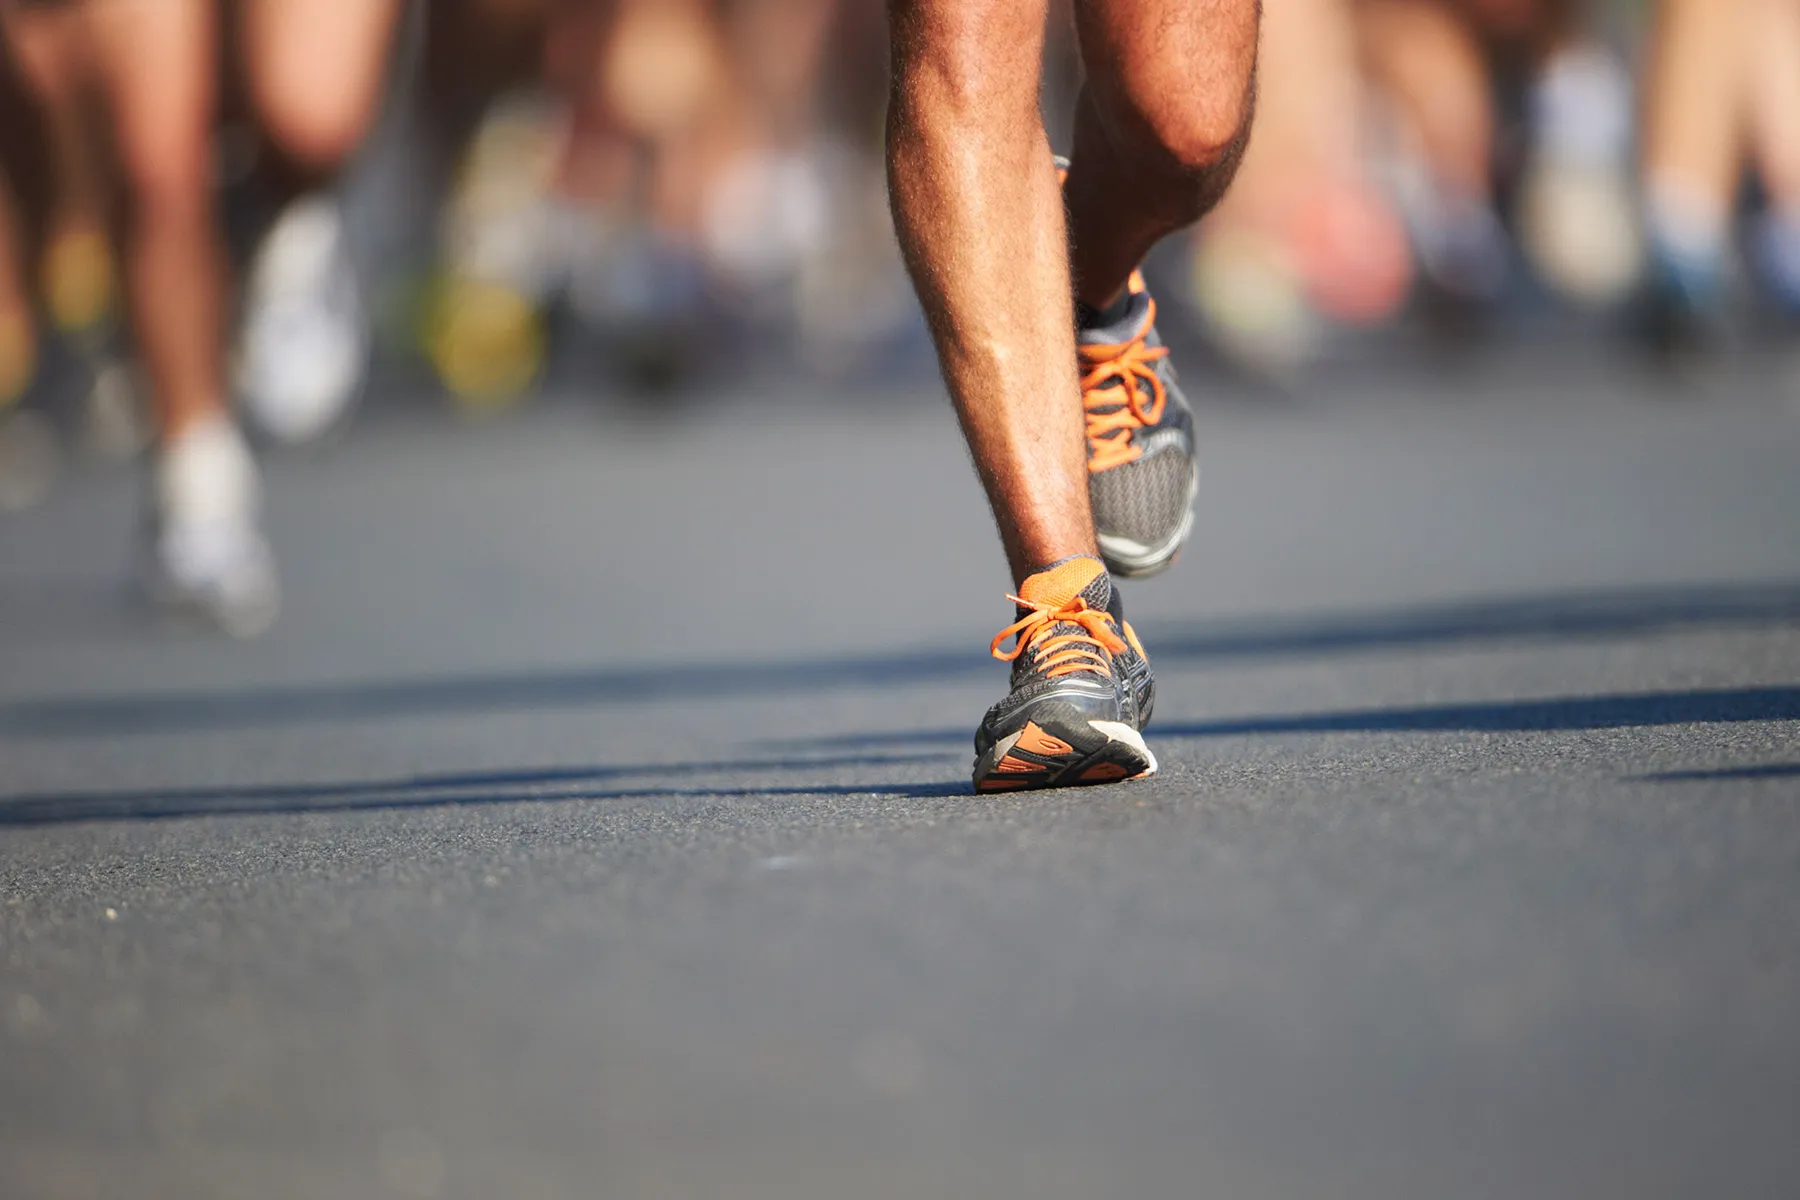 Running Long Distances Might Not Hurt Your Joints After All